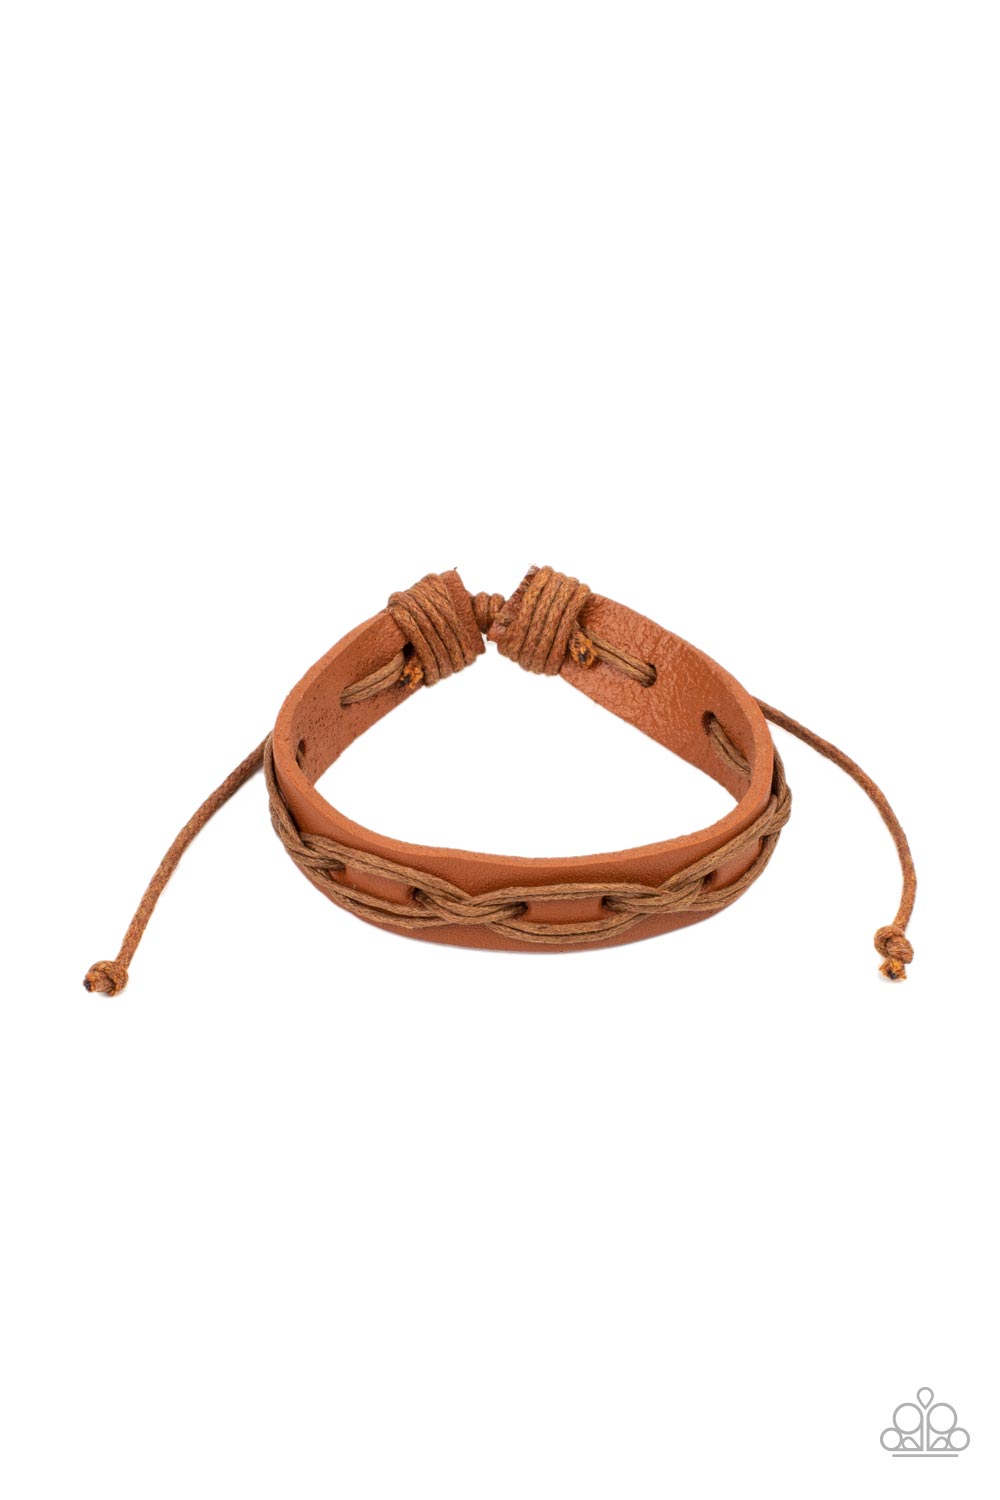 Macho Mystery Brown Urban Bracelet - Paparazzi Accessories  Brown cording is interwoven across the top of a light brown leather band creating an edgy crisscrossed texture around the wrist. Features an adjustable sliding knot closure.  All Paparazzi Accessories are lead free and nickel free!  Sold as one individual bracelet.